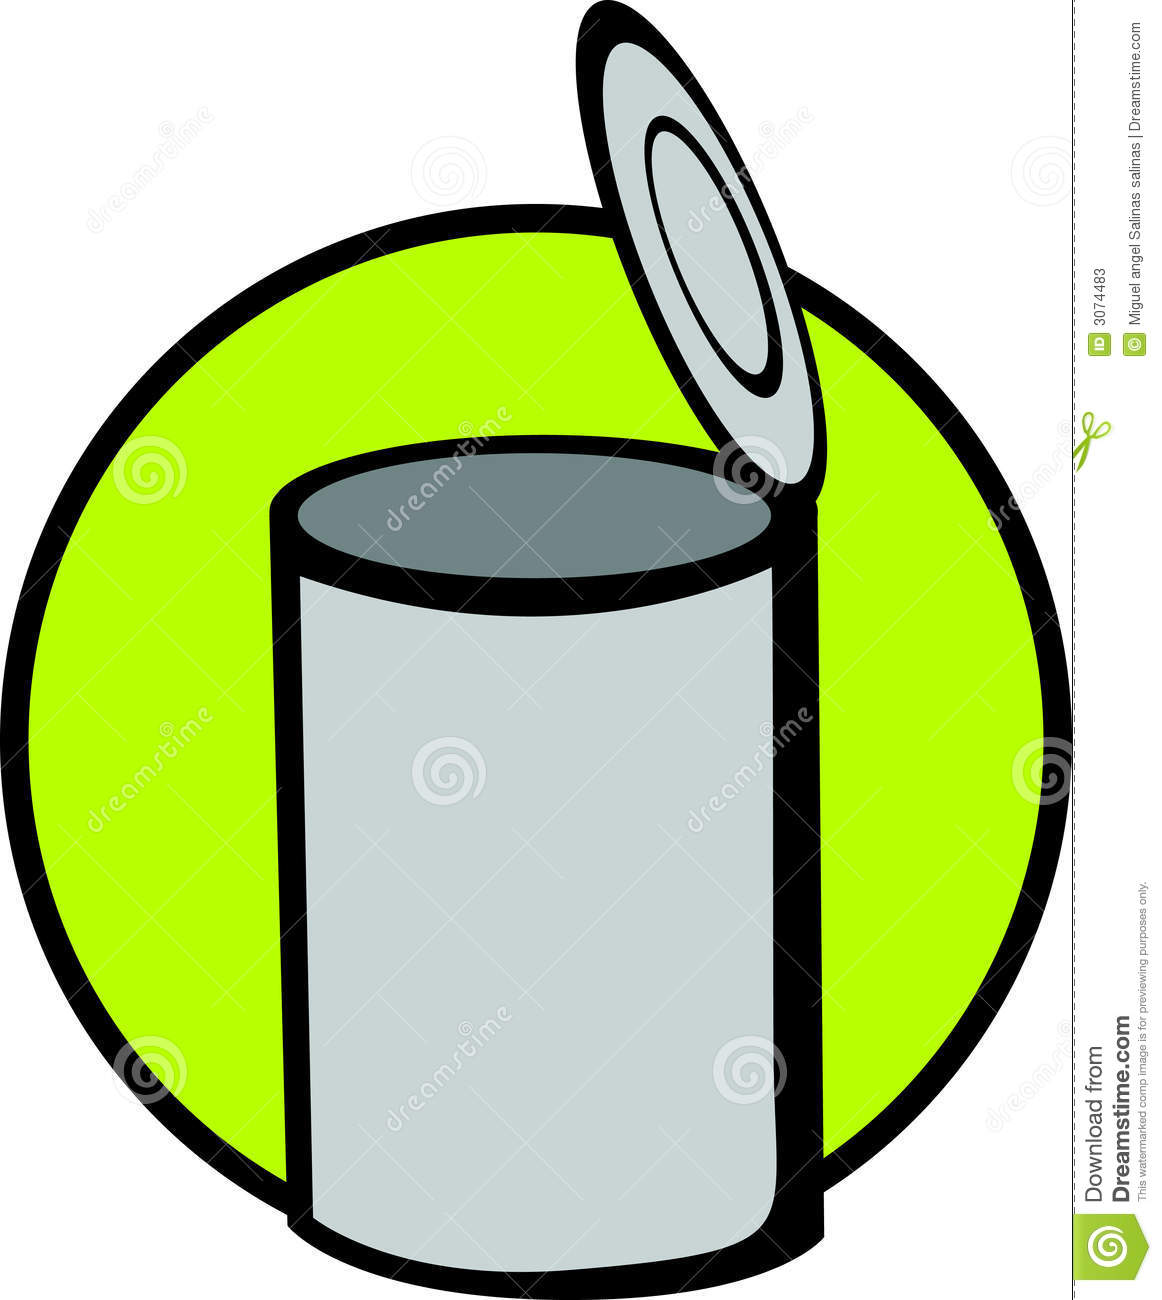 Canned Food Clipart   Clipart Panda   Free Clipart Images